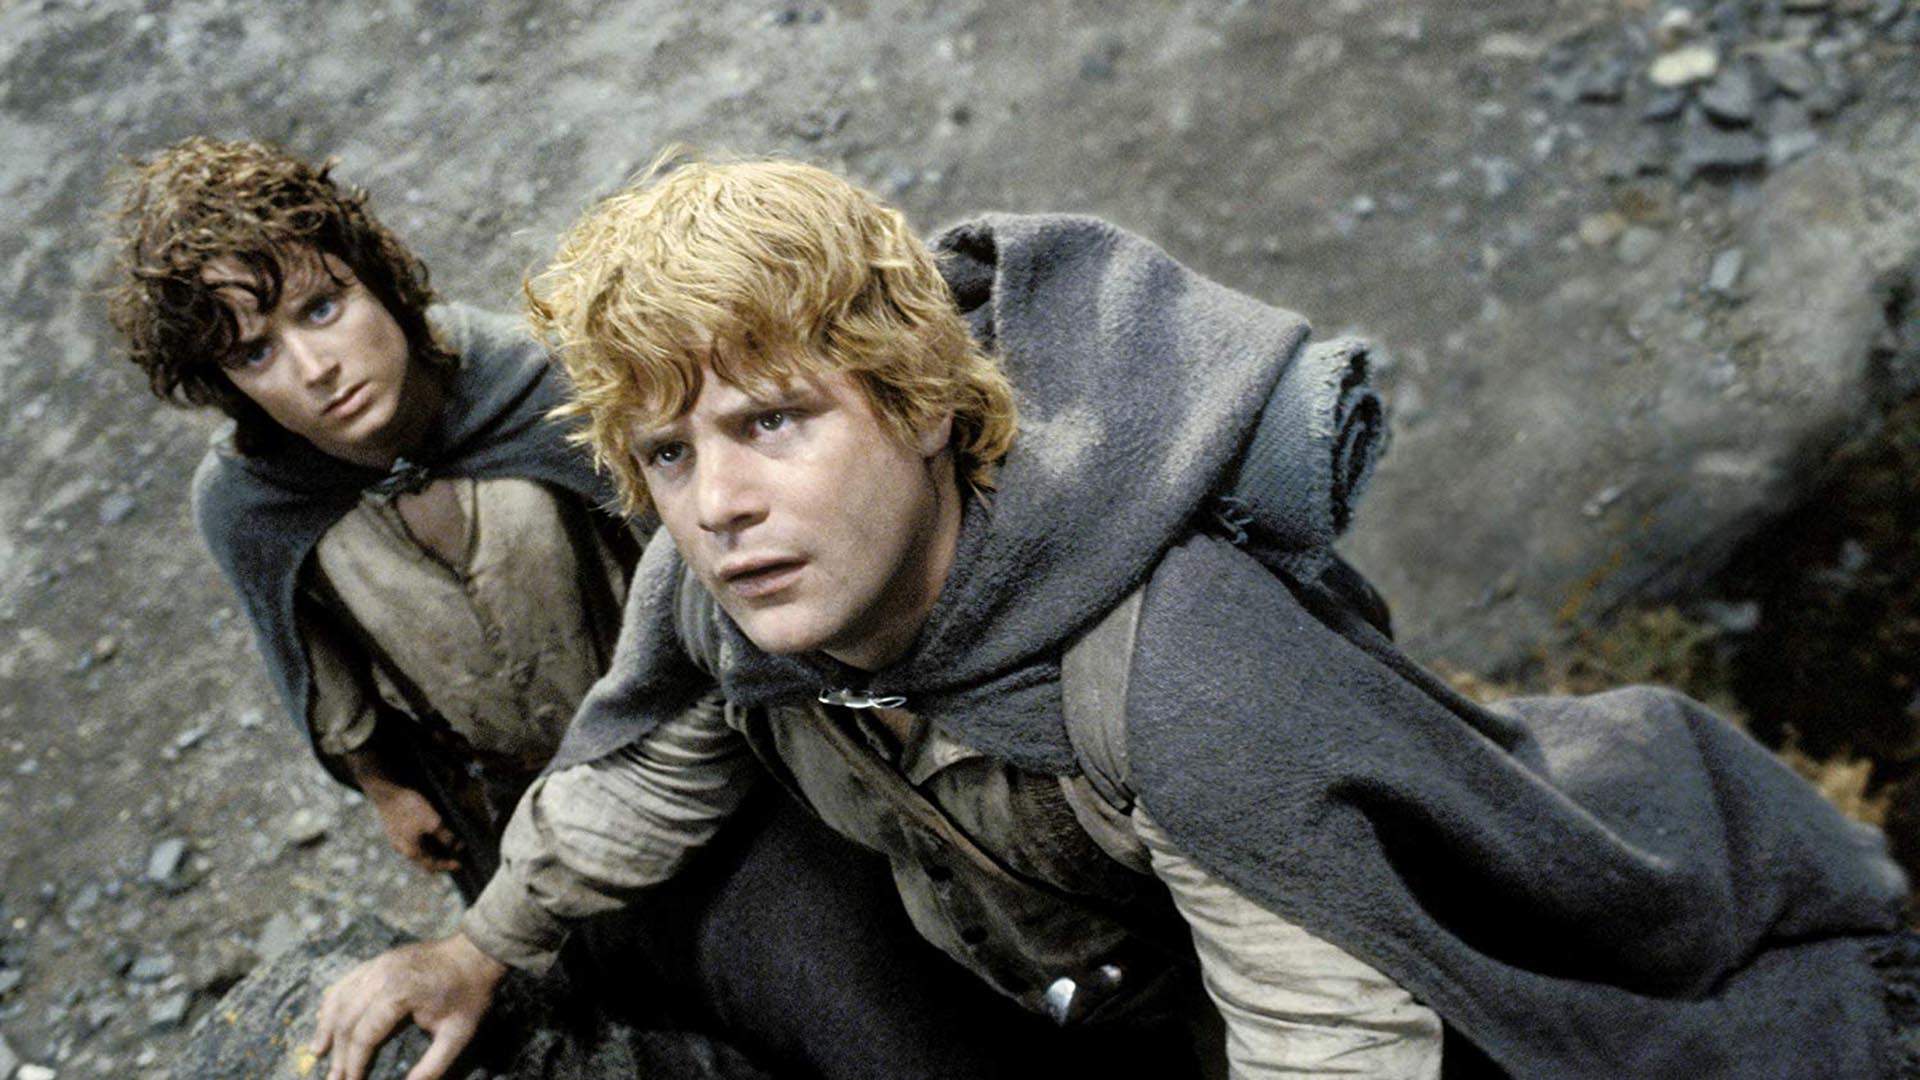 Amazon Has Finally Revealed What Its New 'Lord of the Rings' TV Series Will Be About